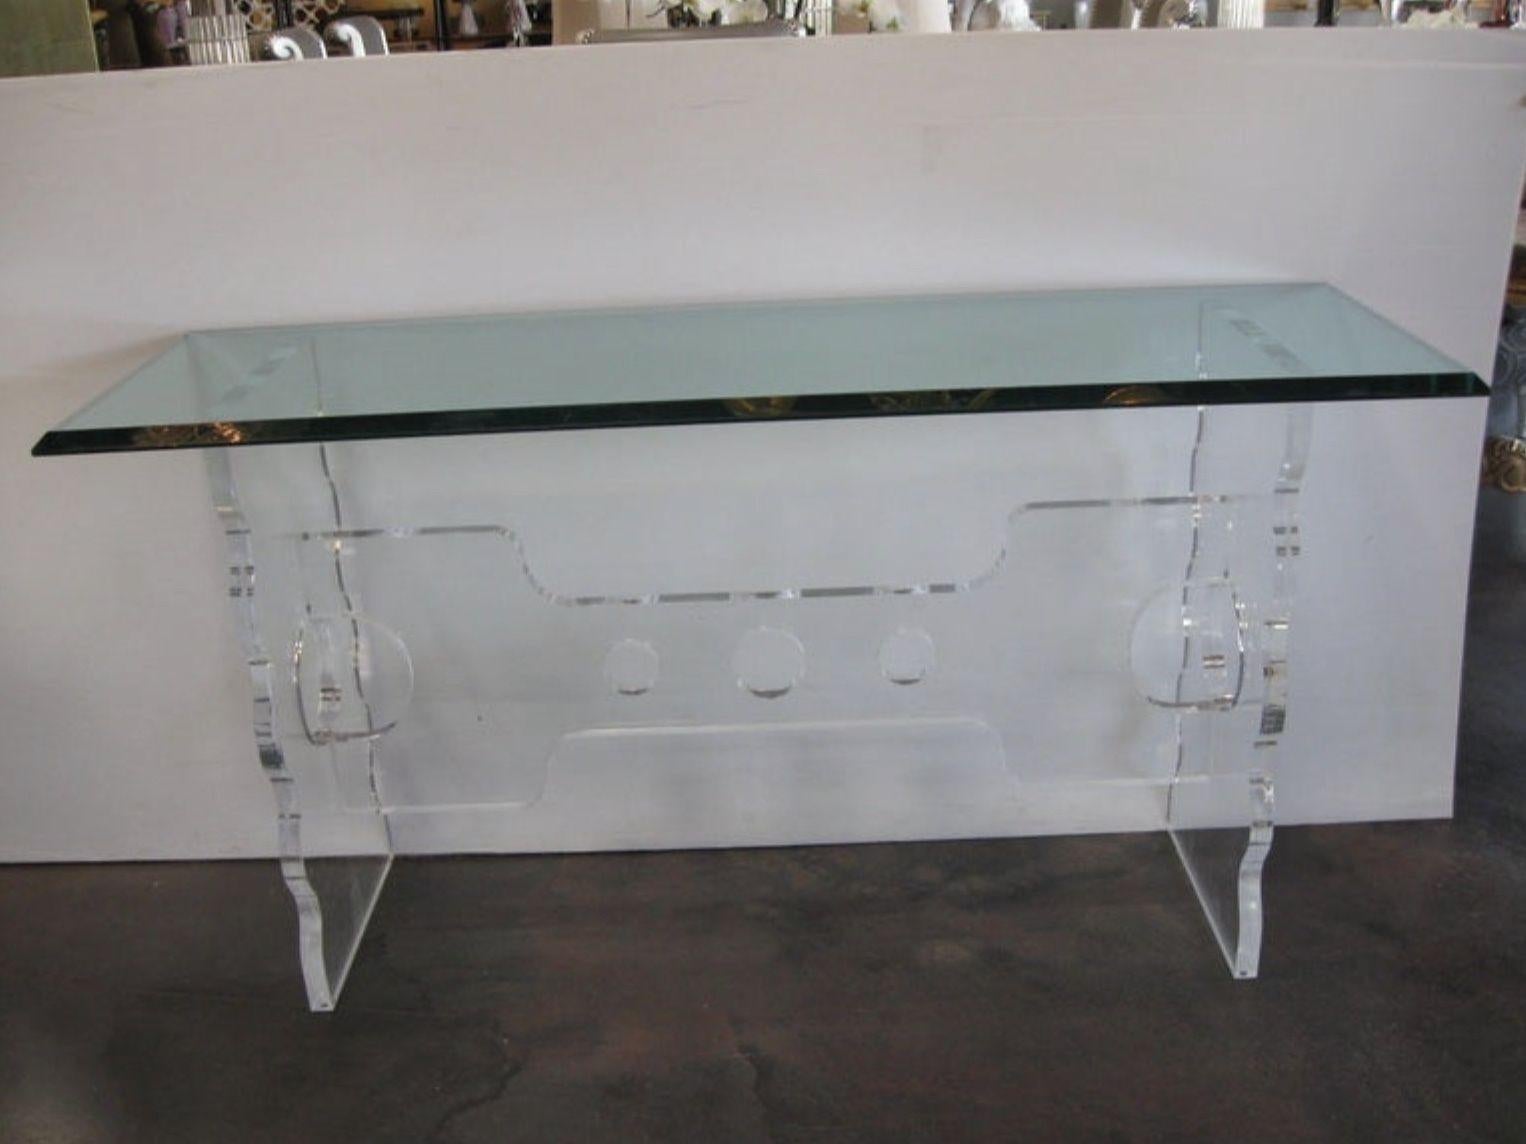 Massive pair of acrylic consoles with 1 inch glass top. The thickness of the lucite is 1 and 1/4 inches.